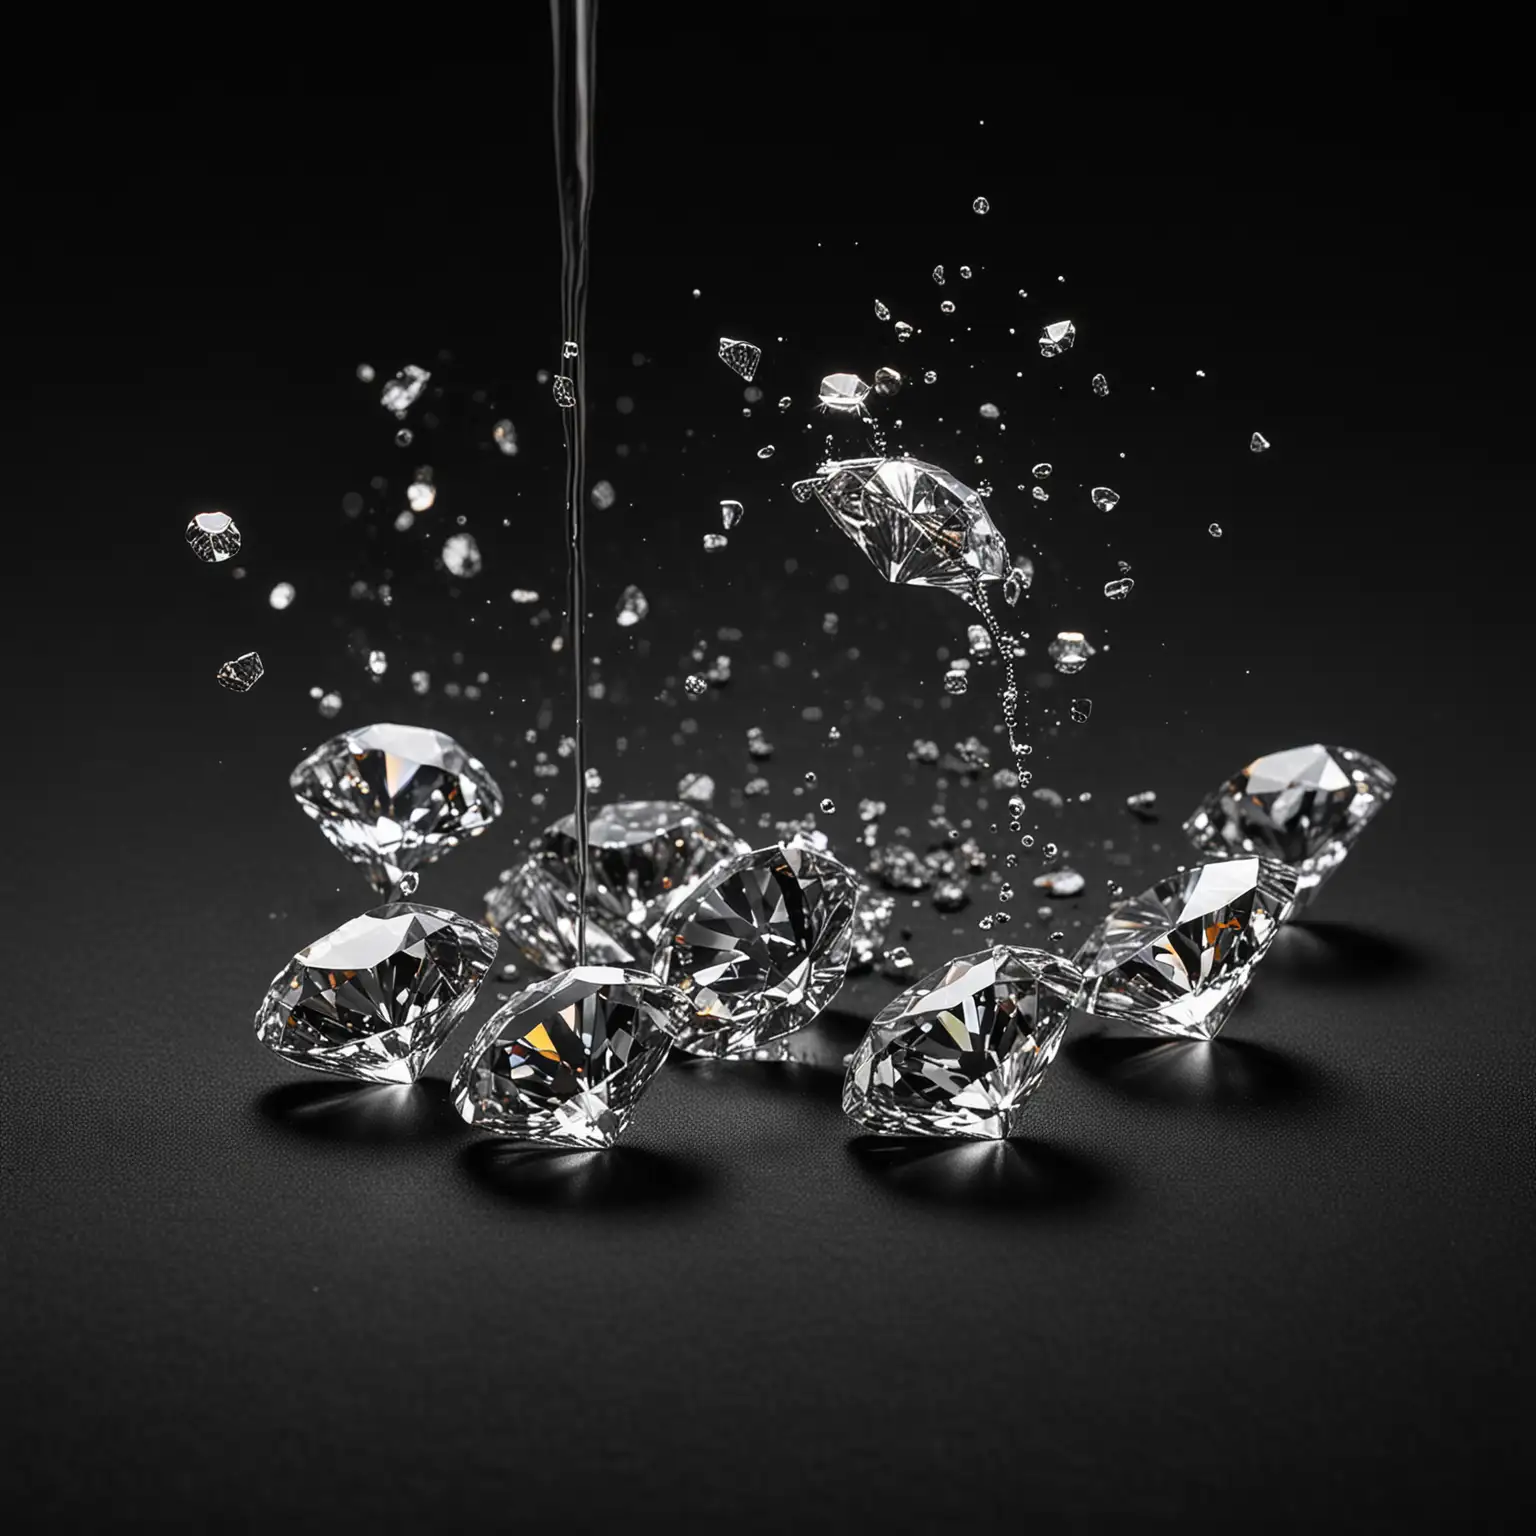 diamonds being poured onto a black background
